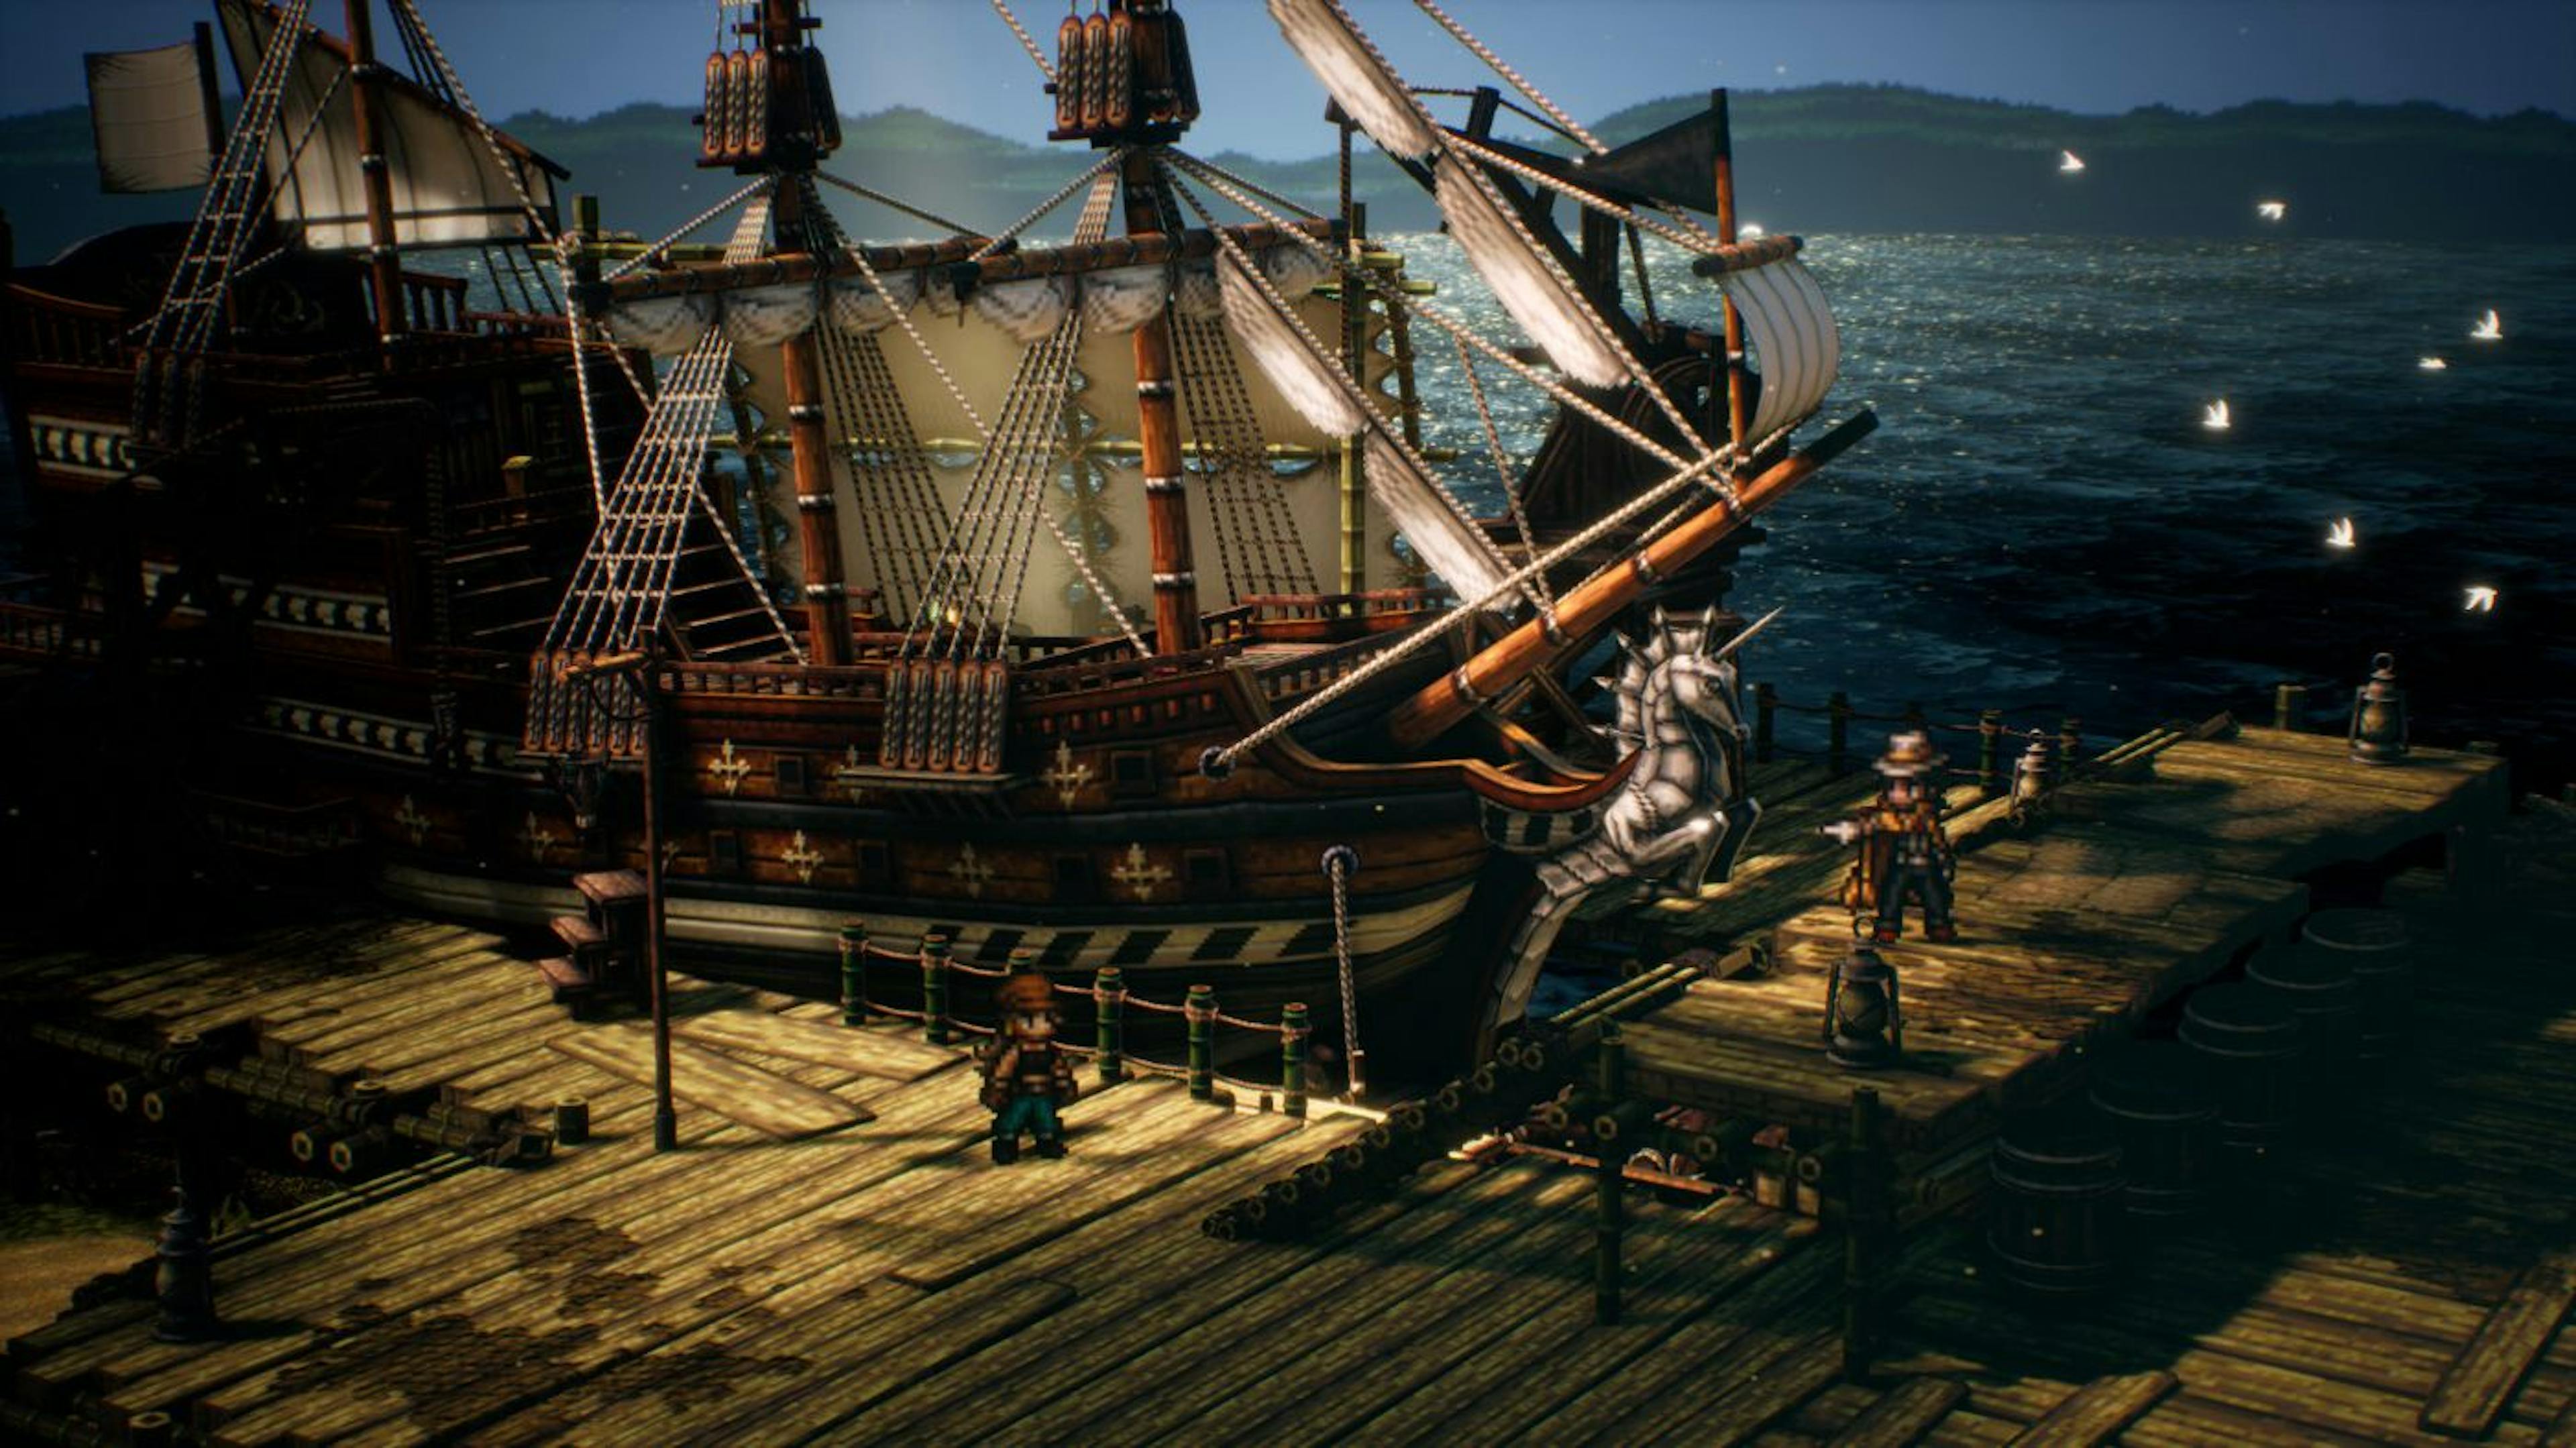 Unlocking the ship and setting sail in Octopath Traveler 2.